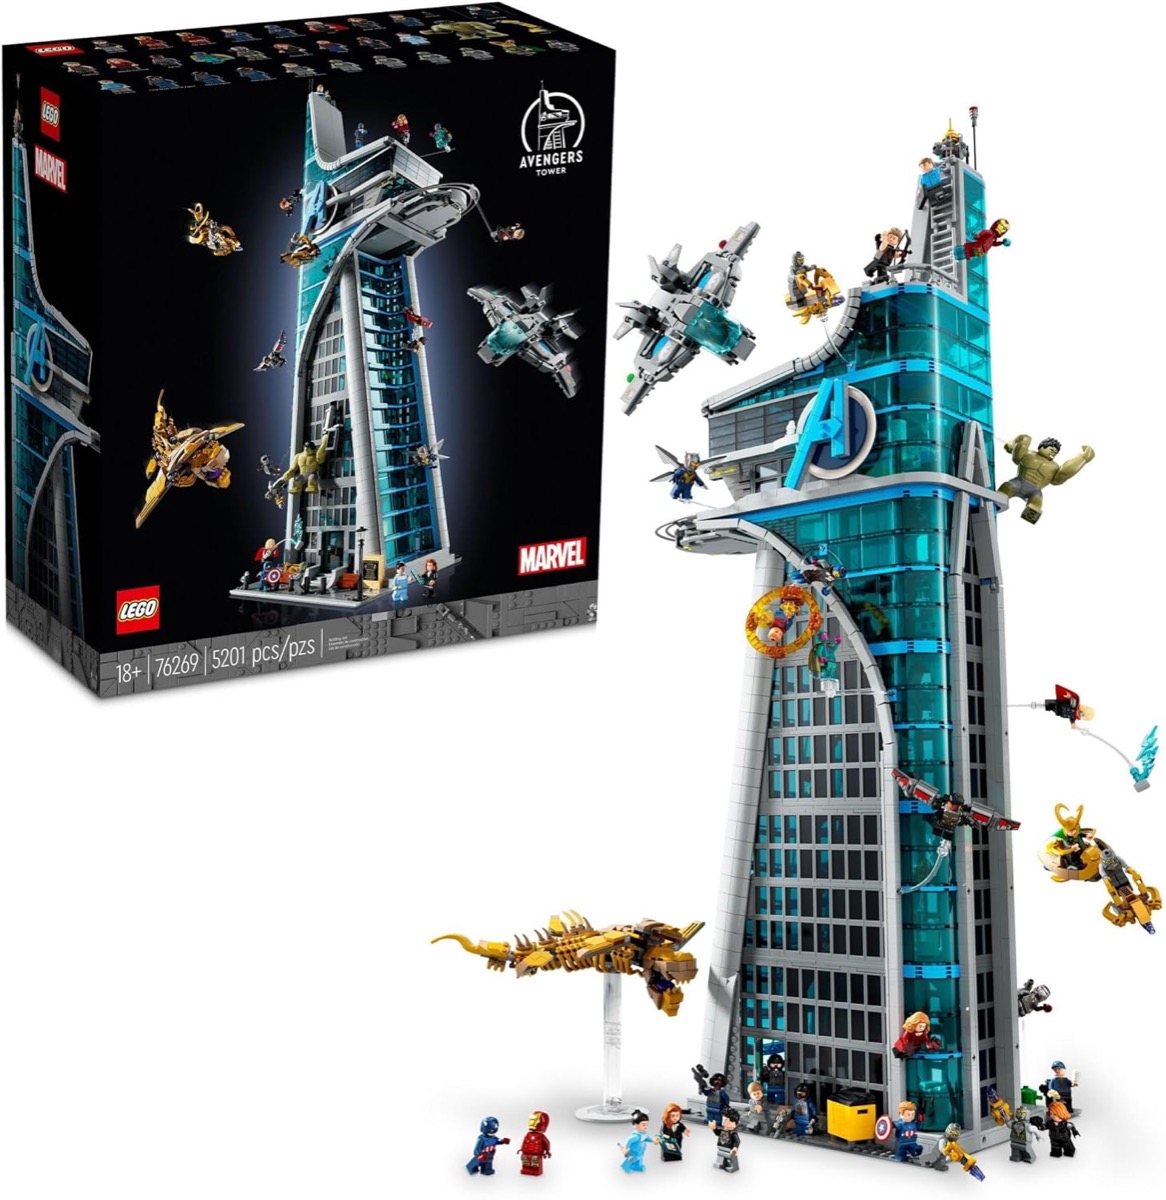 A LEGO version of The Avengers' Tower stands tall